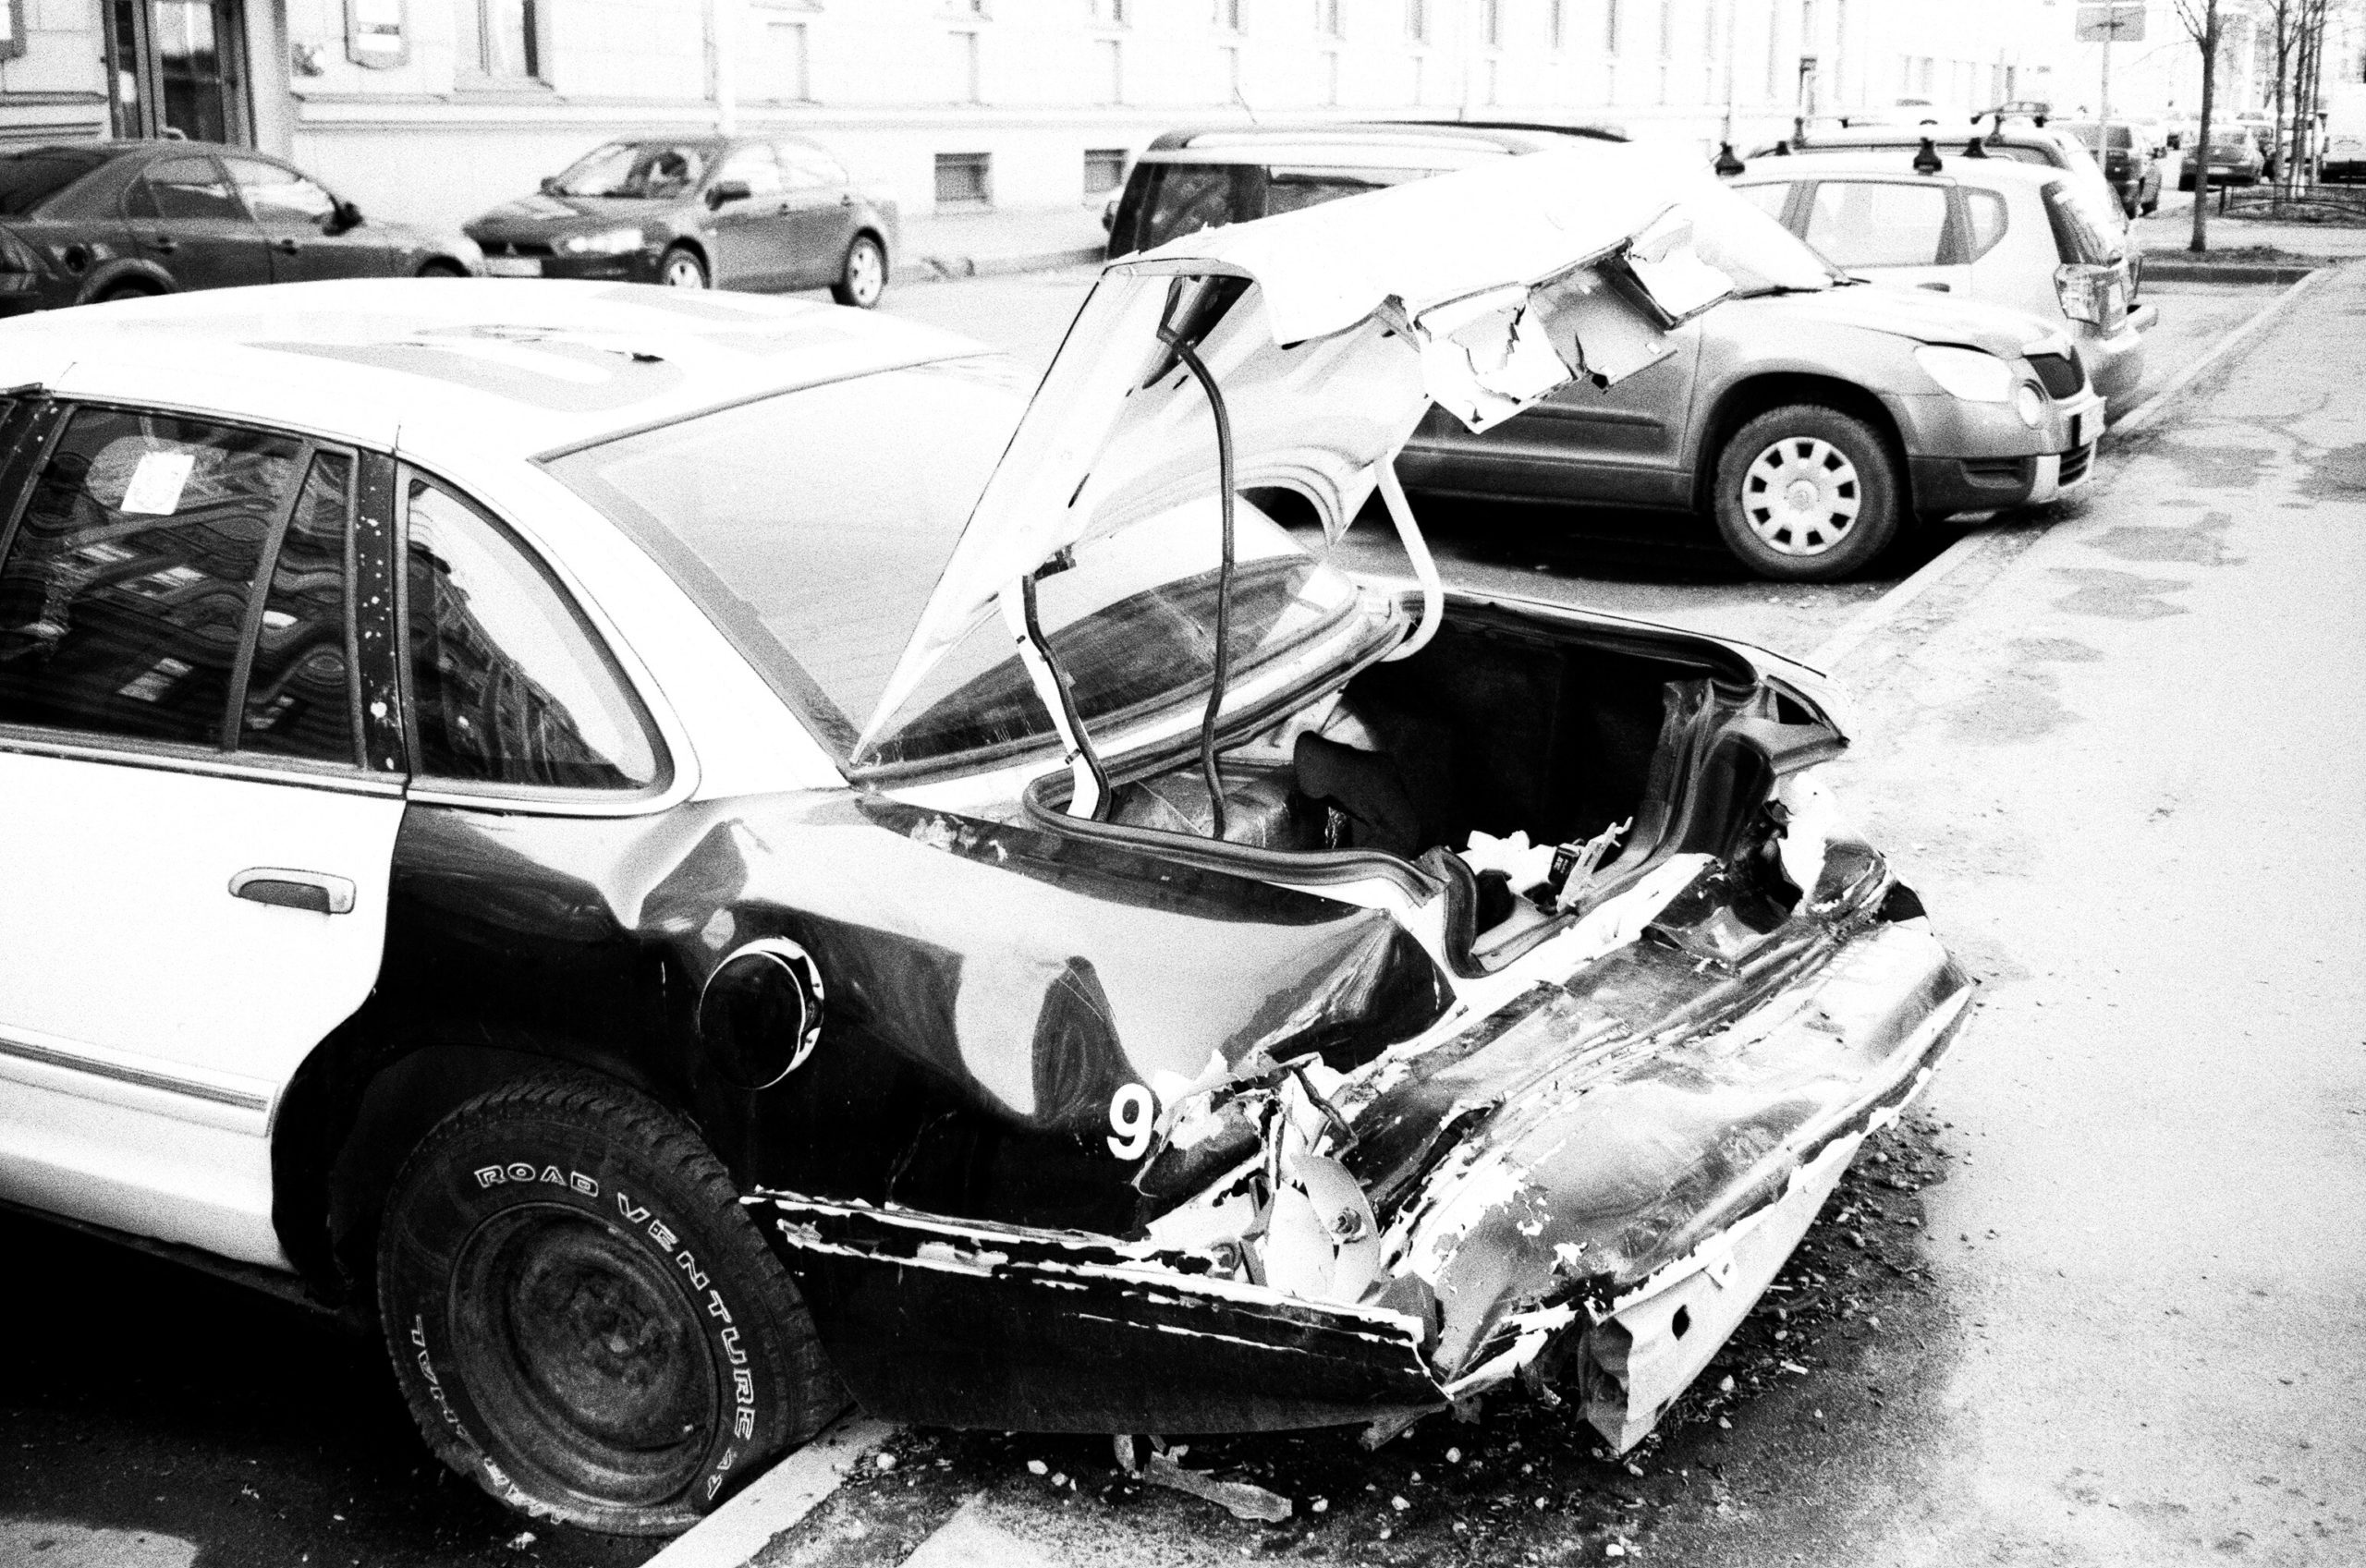 What Are The Steps To Getting Compensation After A Car Accident?